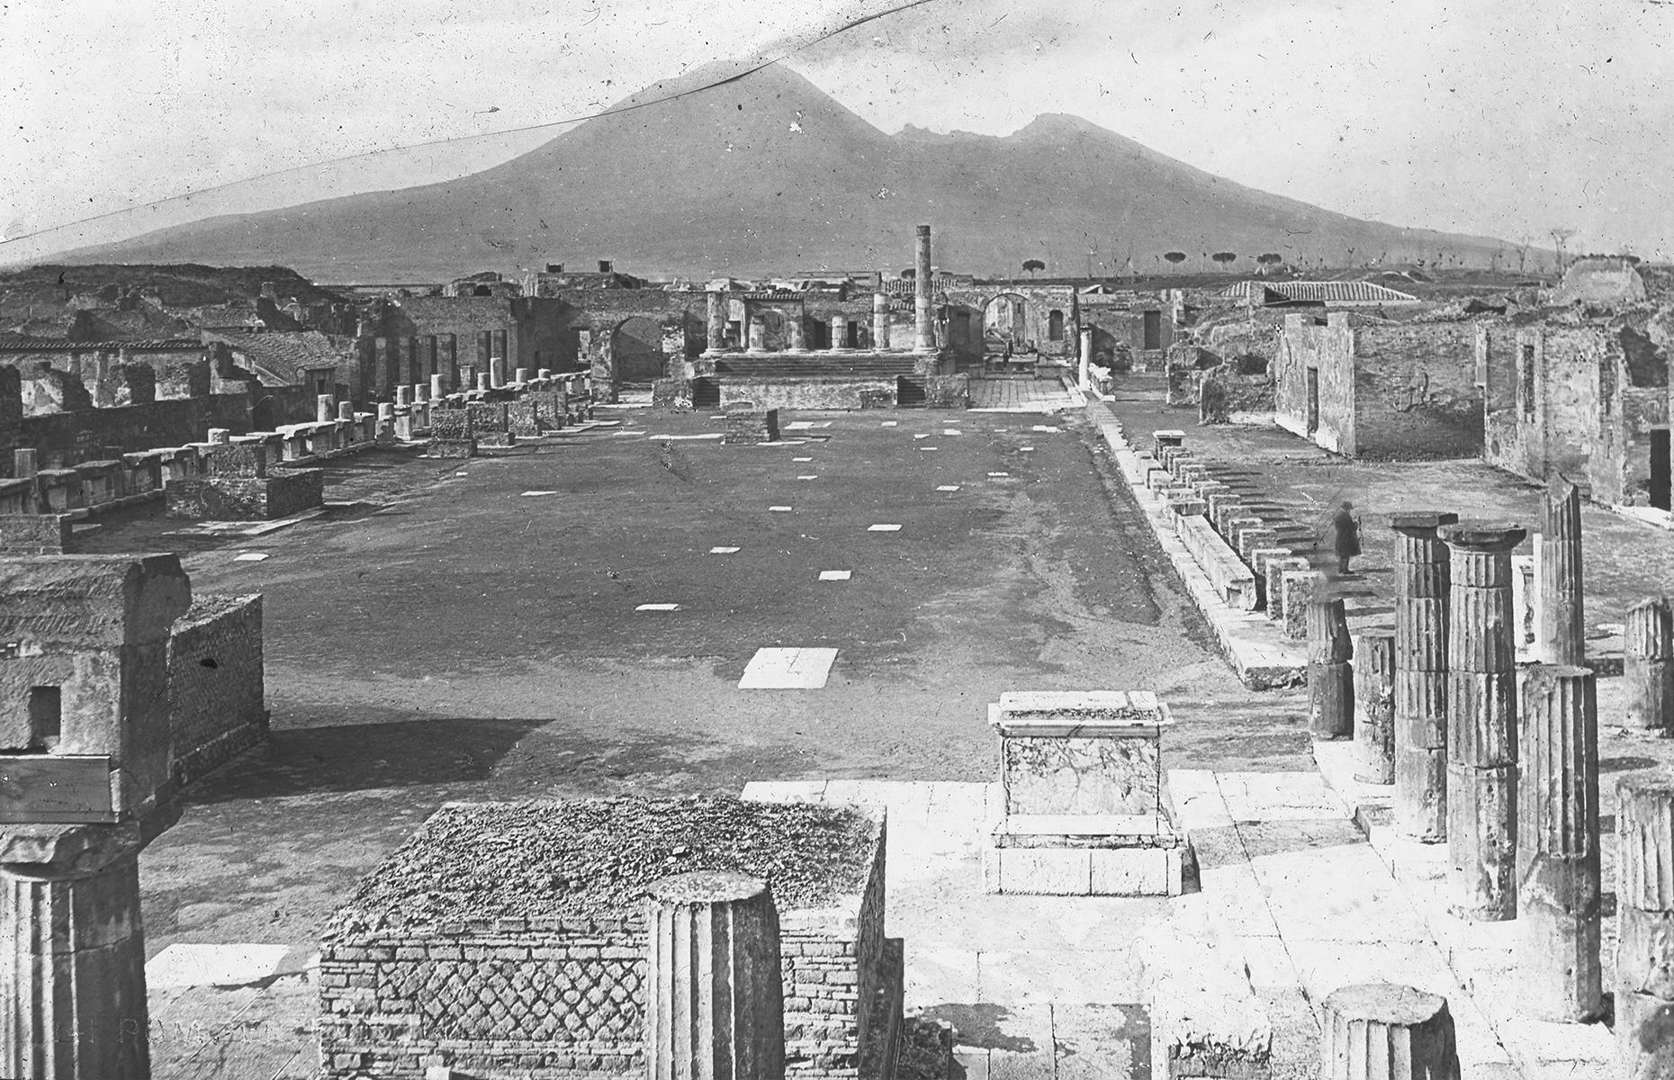 Slide 32 of 41: Probably the world's most famous ruined city, Pompeii was swallowed by lava and ash when Mount Vesuvius erupted in AD 79. Before it met its tragic fate, the city was a booming centre of trade and a cultural hub, with buildings such as bathhouses, temples, an amphitheatre and more. When Pompeii's ruins were finally uncovered in the 16th century, they were impressively preserved due to the layer of ash that had shrouded them for millennia. They're shown here in the early 20th century.